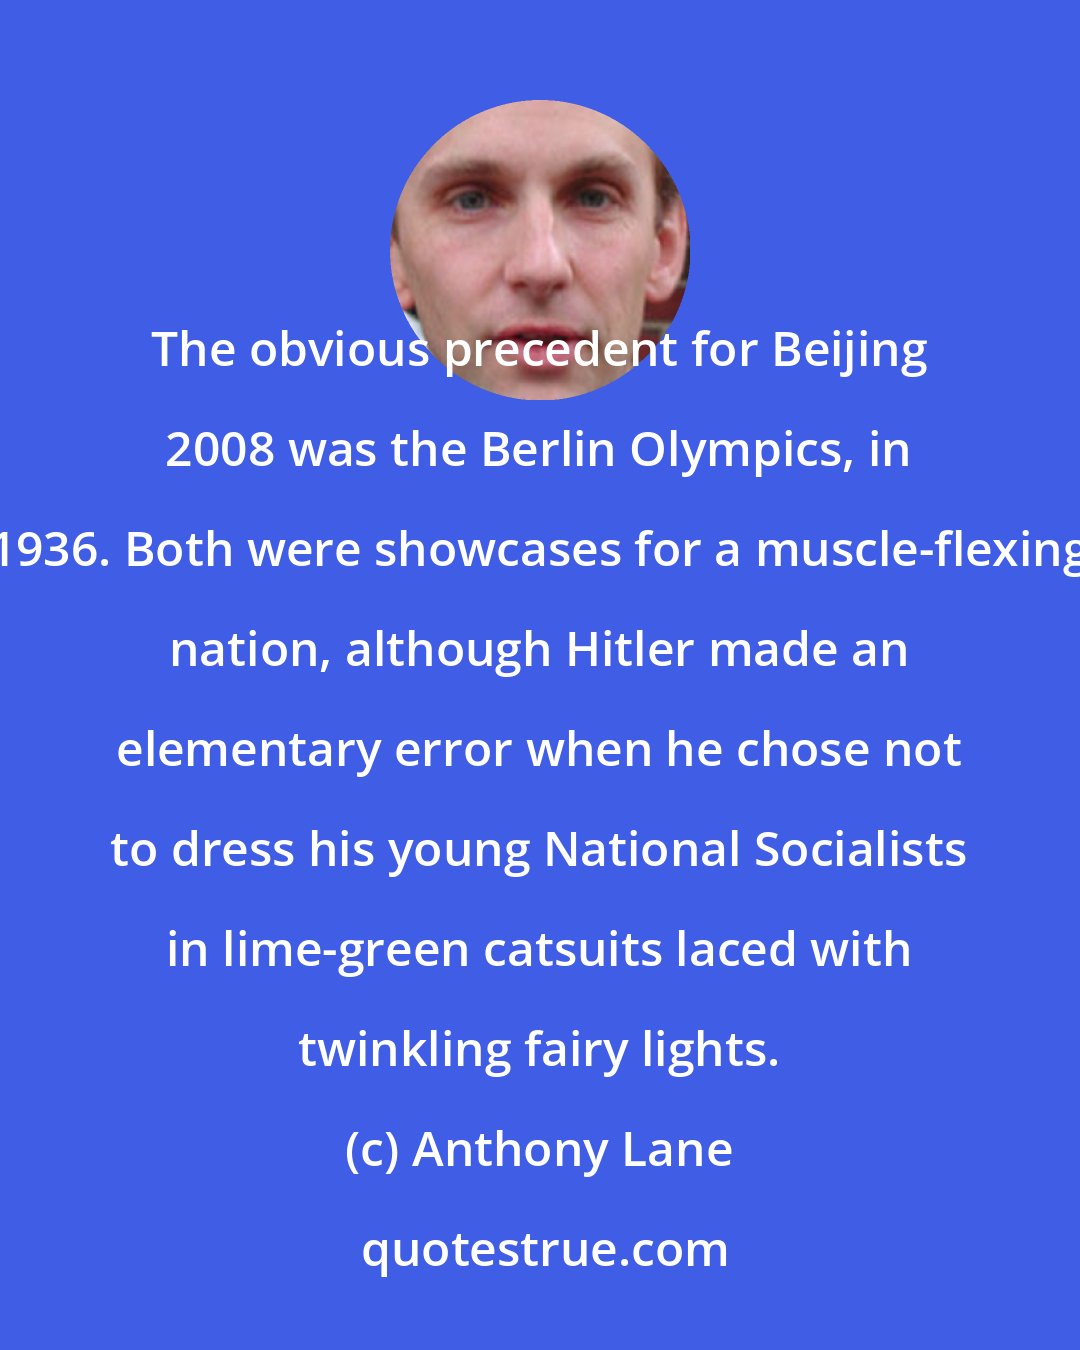 Anthony Lane: The obvious precedent for Beijing 2008 was the Berlin Olympics, in 1936. Both were showcases for a muscle-flexing nation, although Hitler made an elementary error when he chose not to dress his young National Socialists in lime-green catsuits laced with twinkling fairy lights.